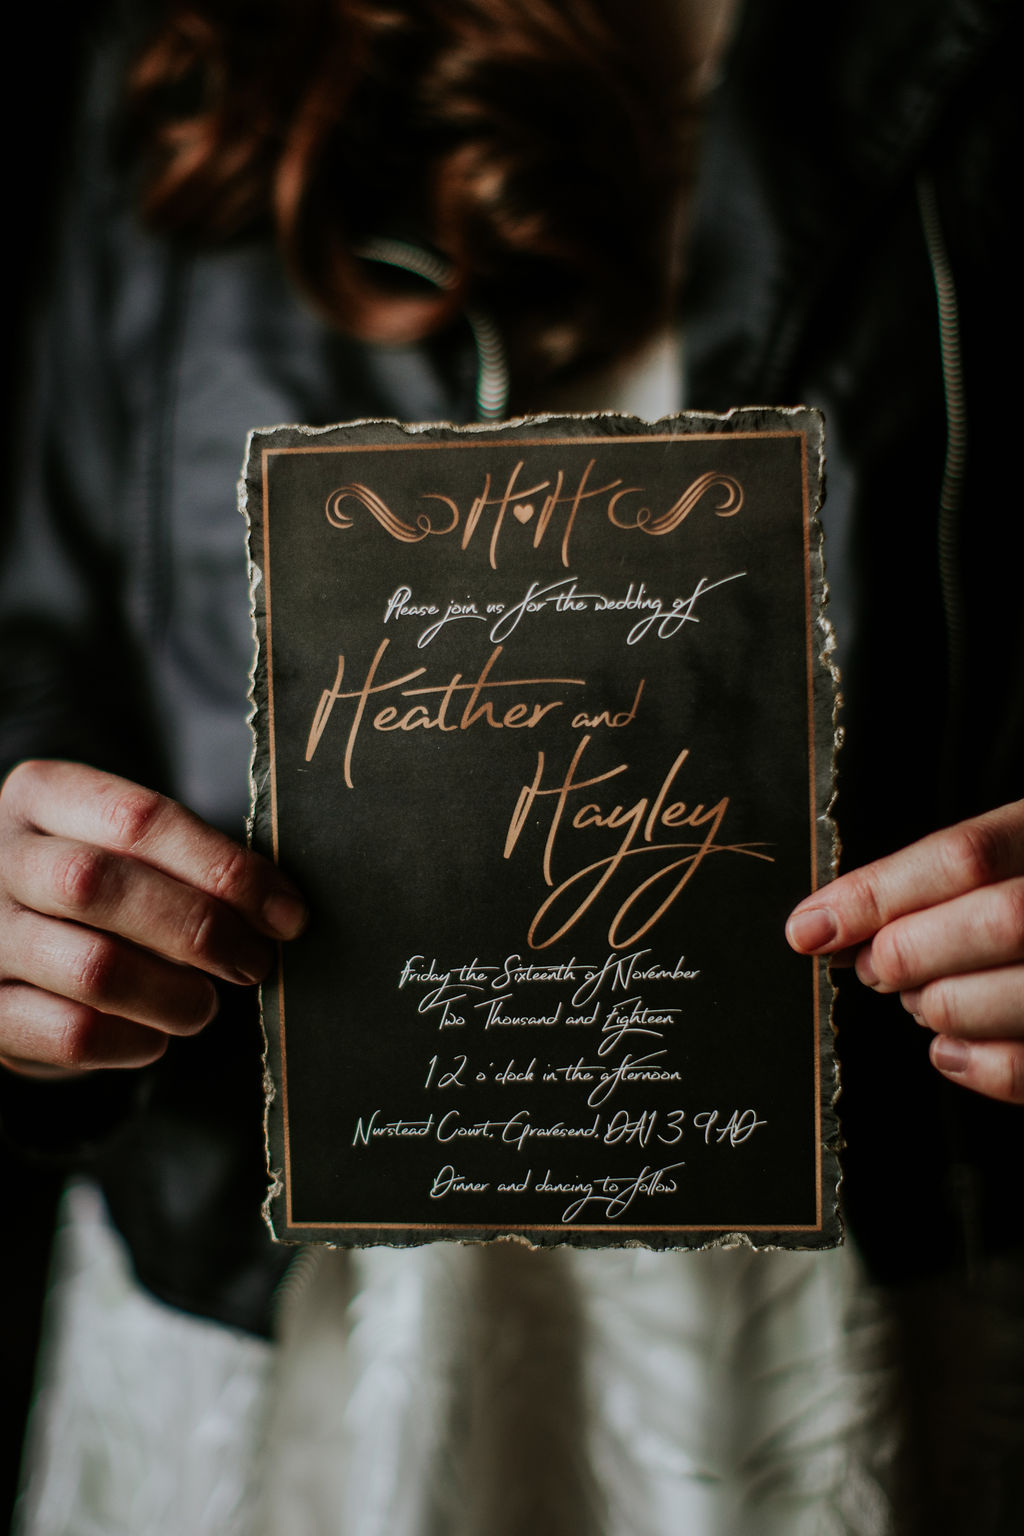 Edgy Luxe- Dark And Moody Wedding Styling ⋆ Unconventional Wedding